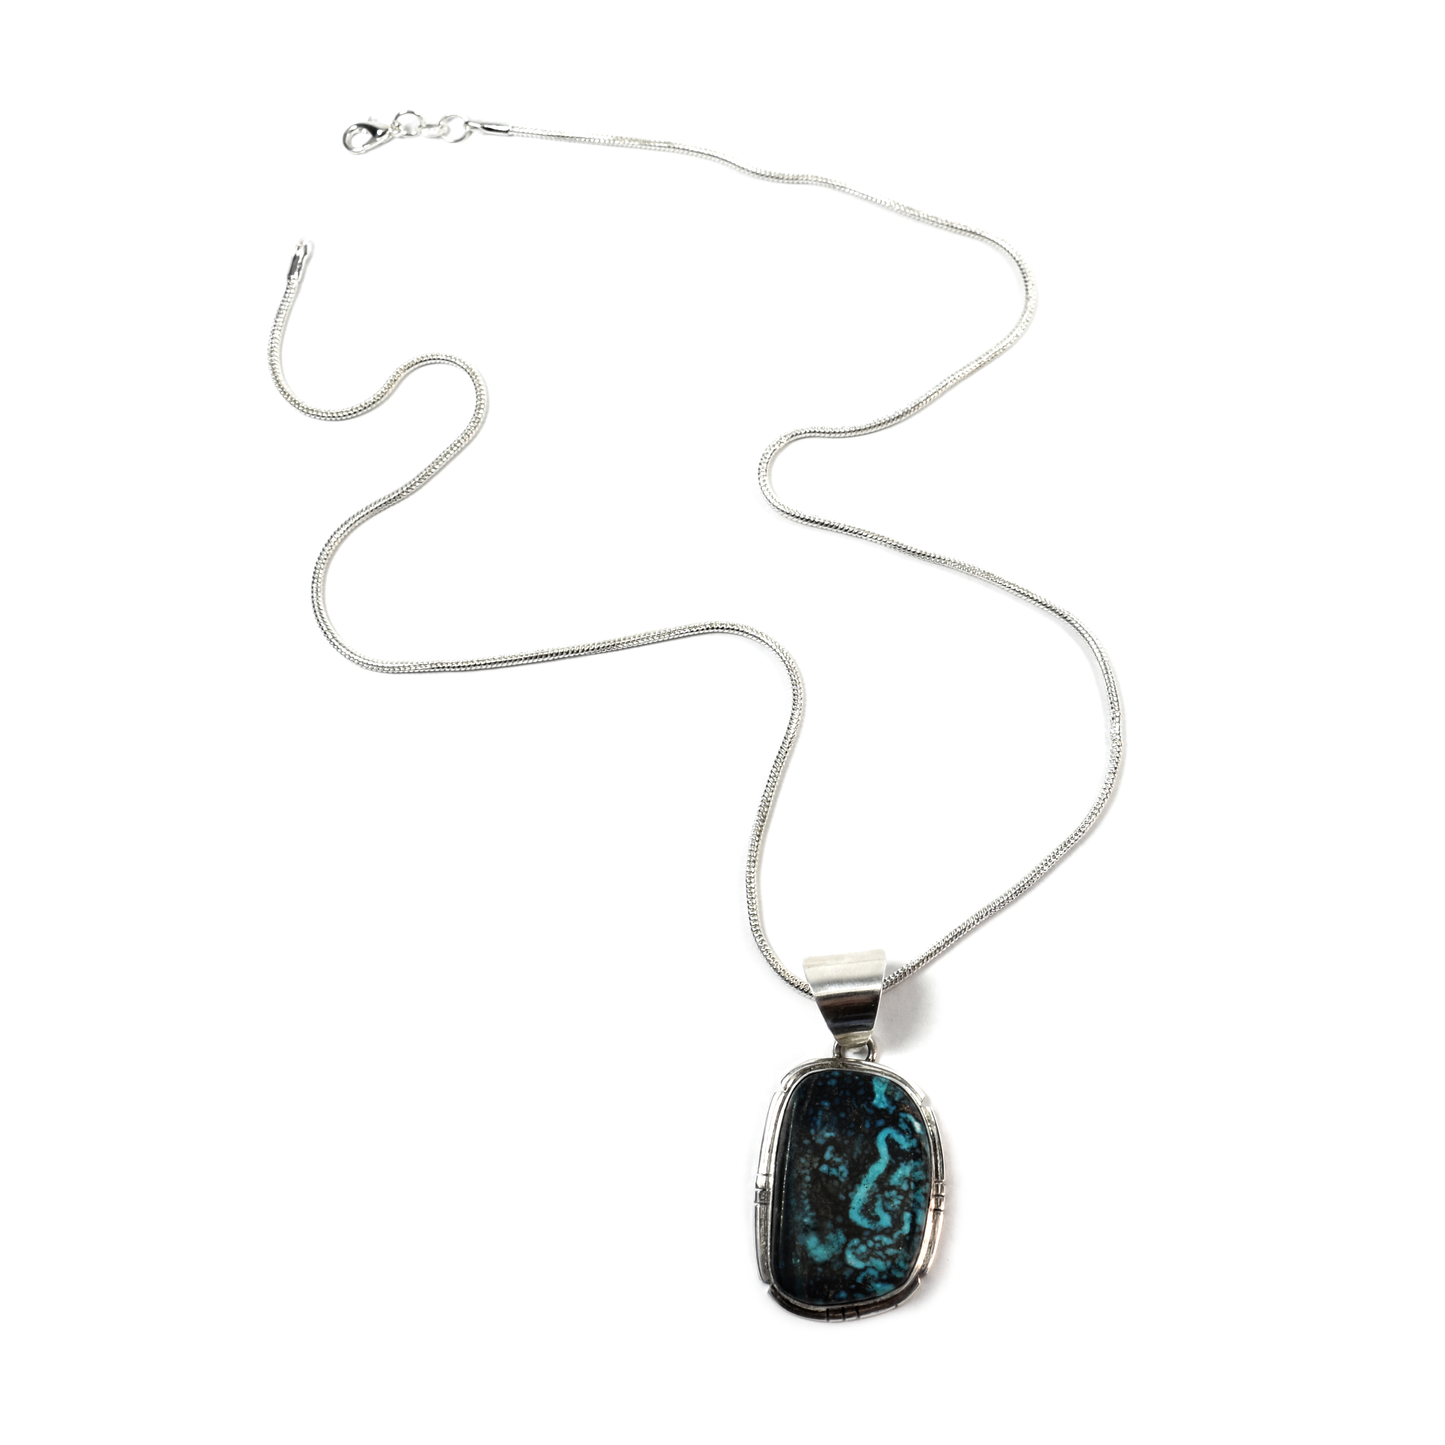 Kingman Turquoise & Hand-Tooled Silver Necklace by Samson Edsitty